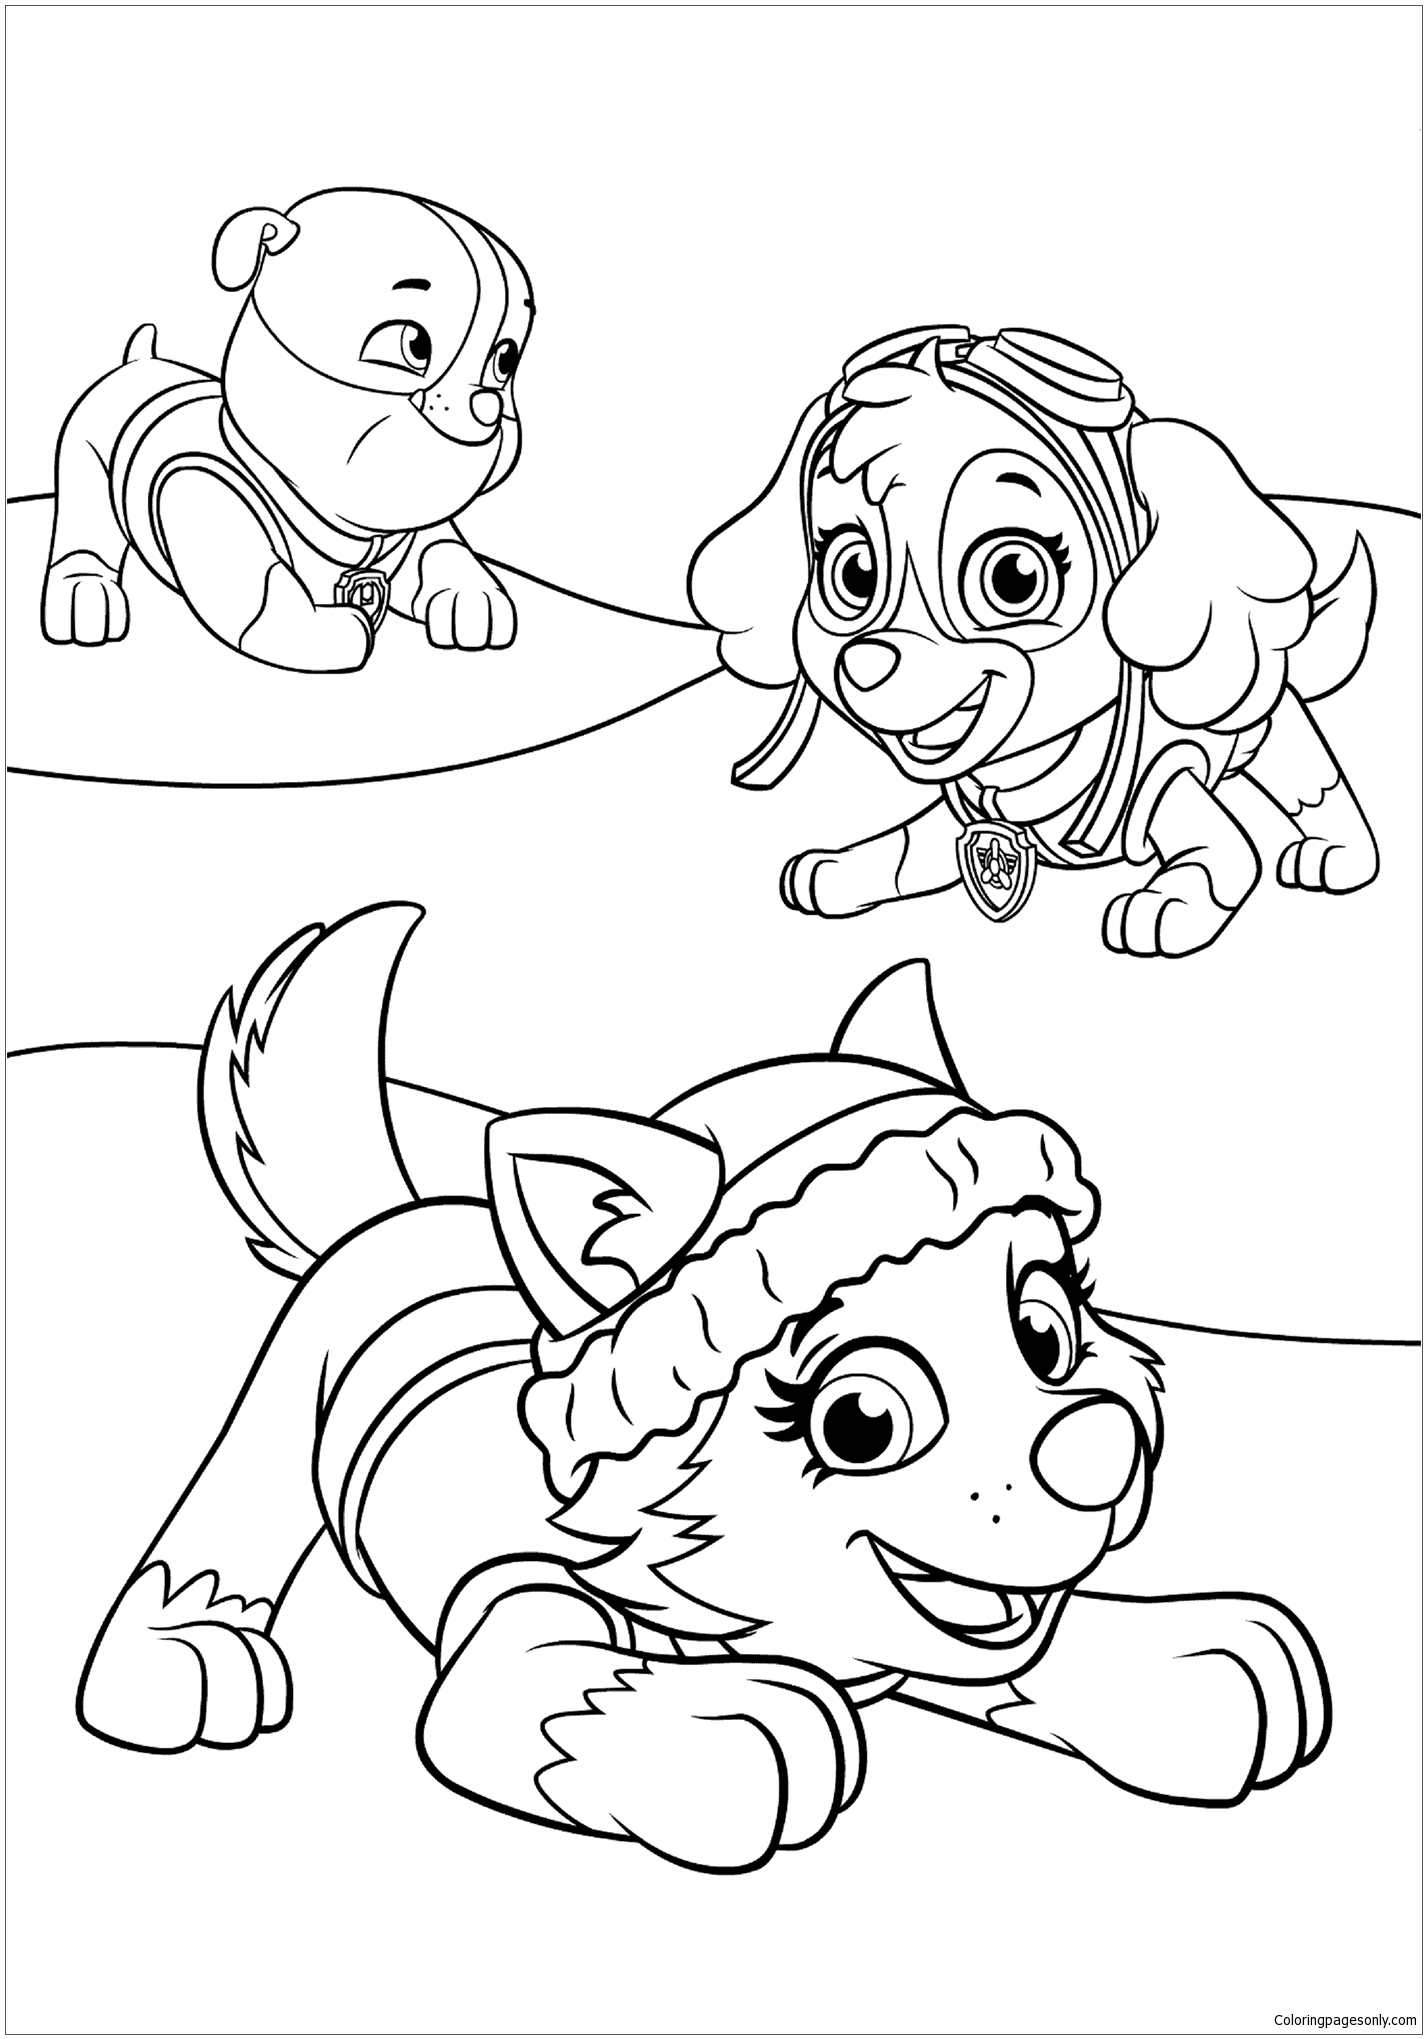 Paw Patrol Coloring Pages FREE Printable 116